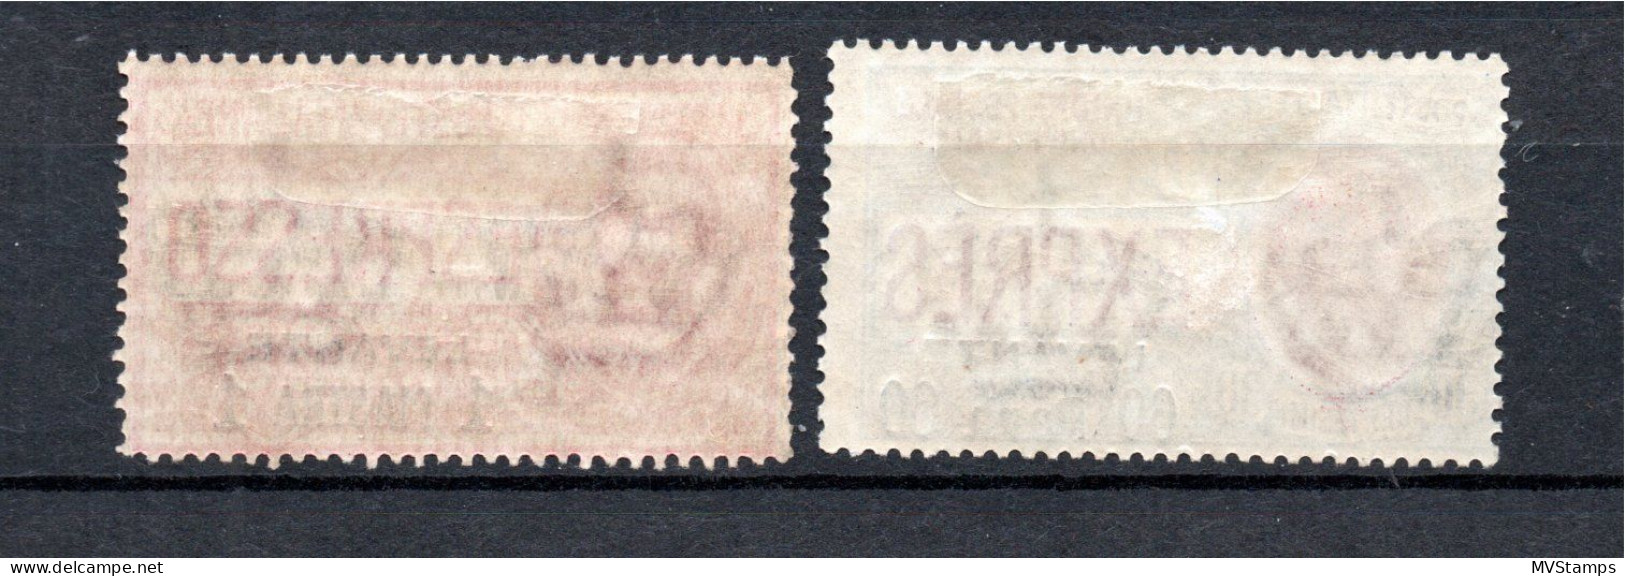 Italian Levant 1908 Old Set Overpinted Espresso Stamps (Michel II) MLH - General Issues